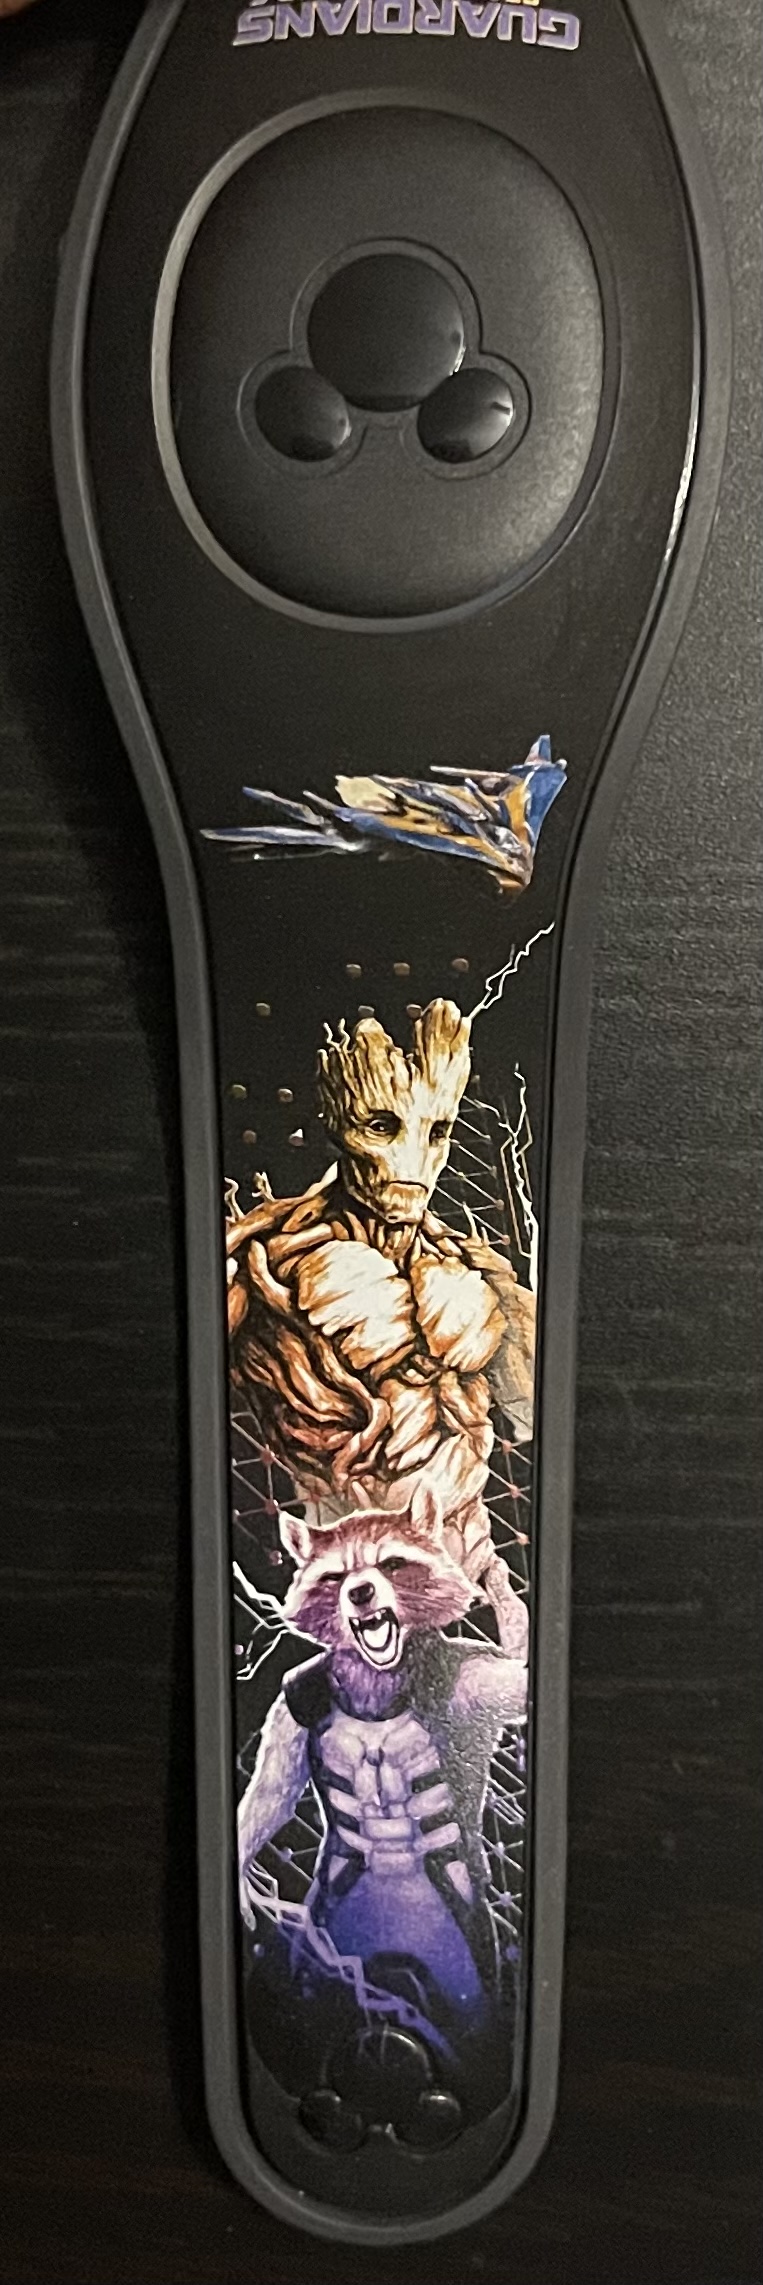 Check out this new Guardians of the Galaxy: Cosmic Rewind Limited Edition 2500 MagicBand just released